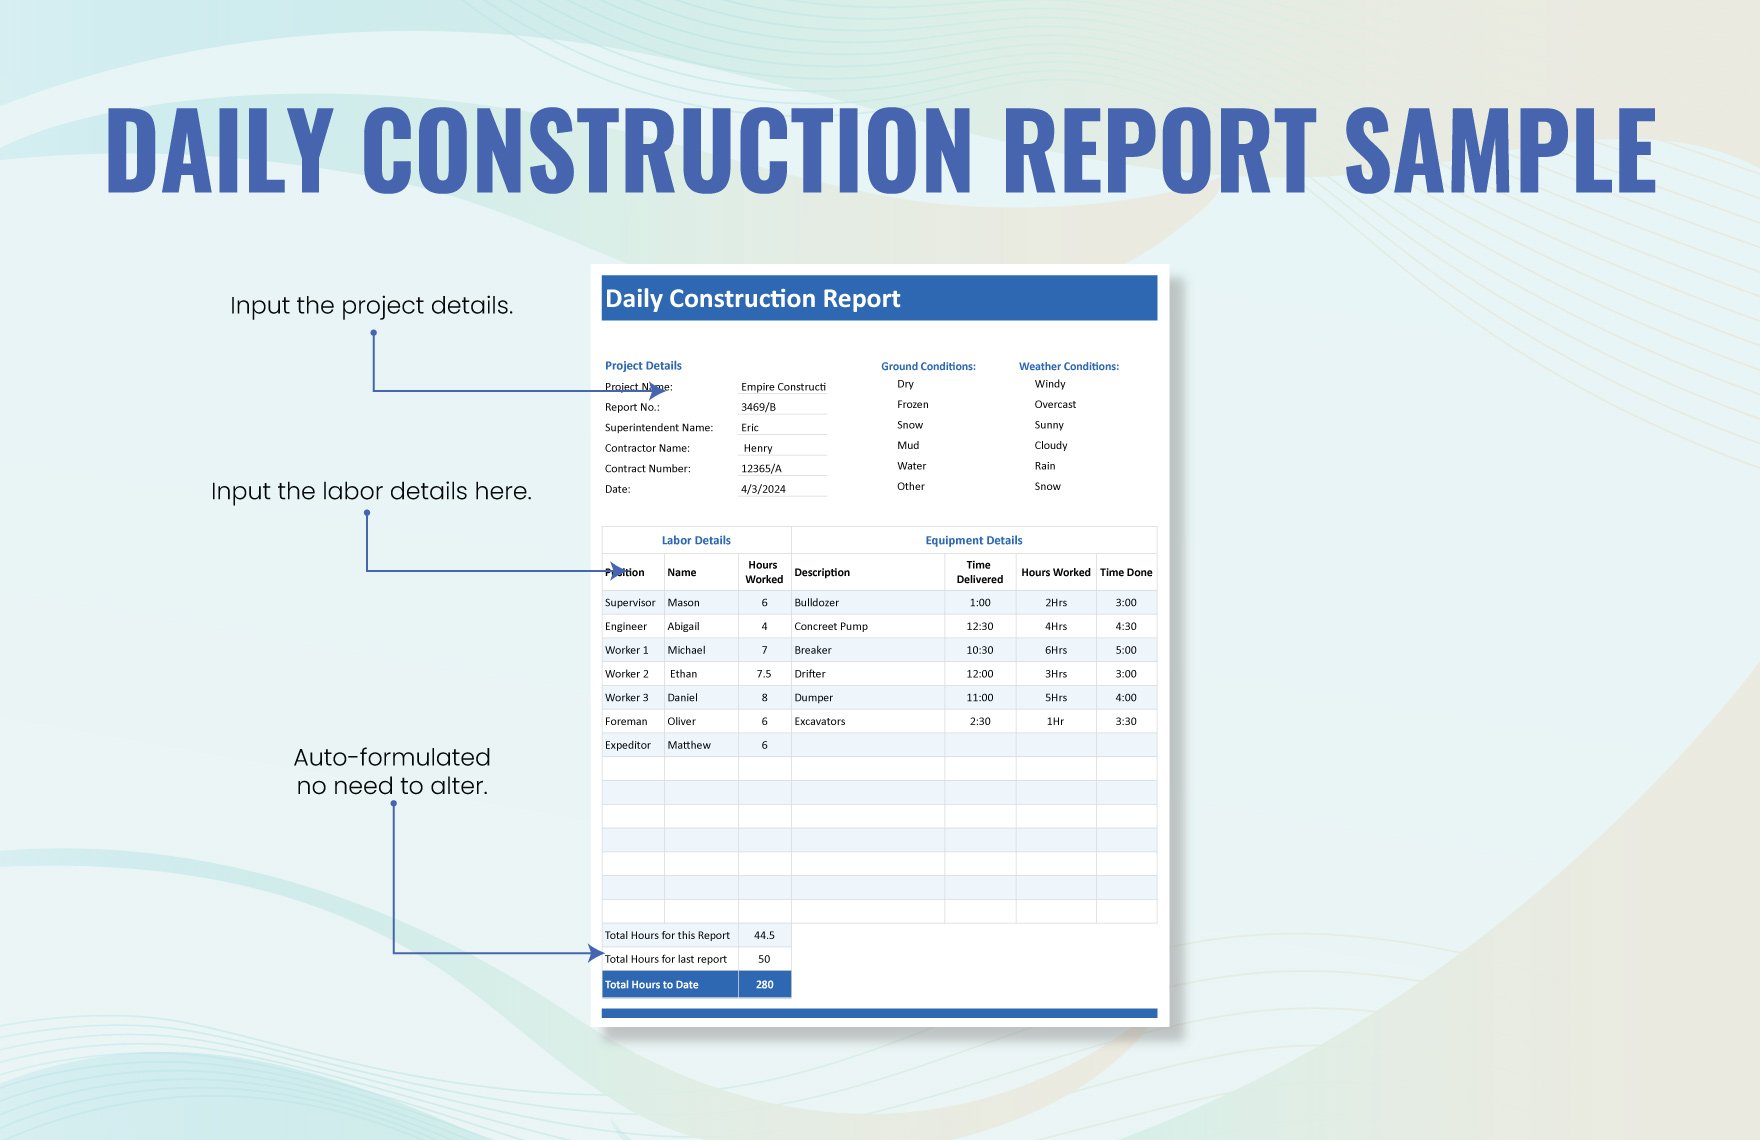 Daily Construction Report Sample